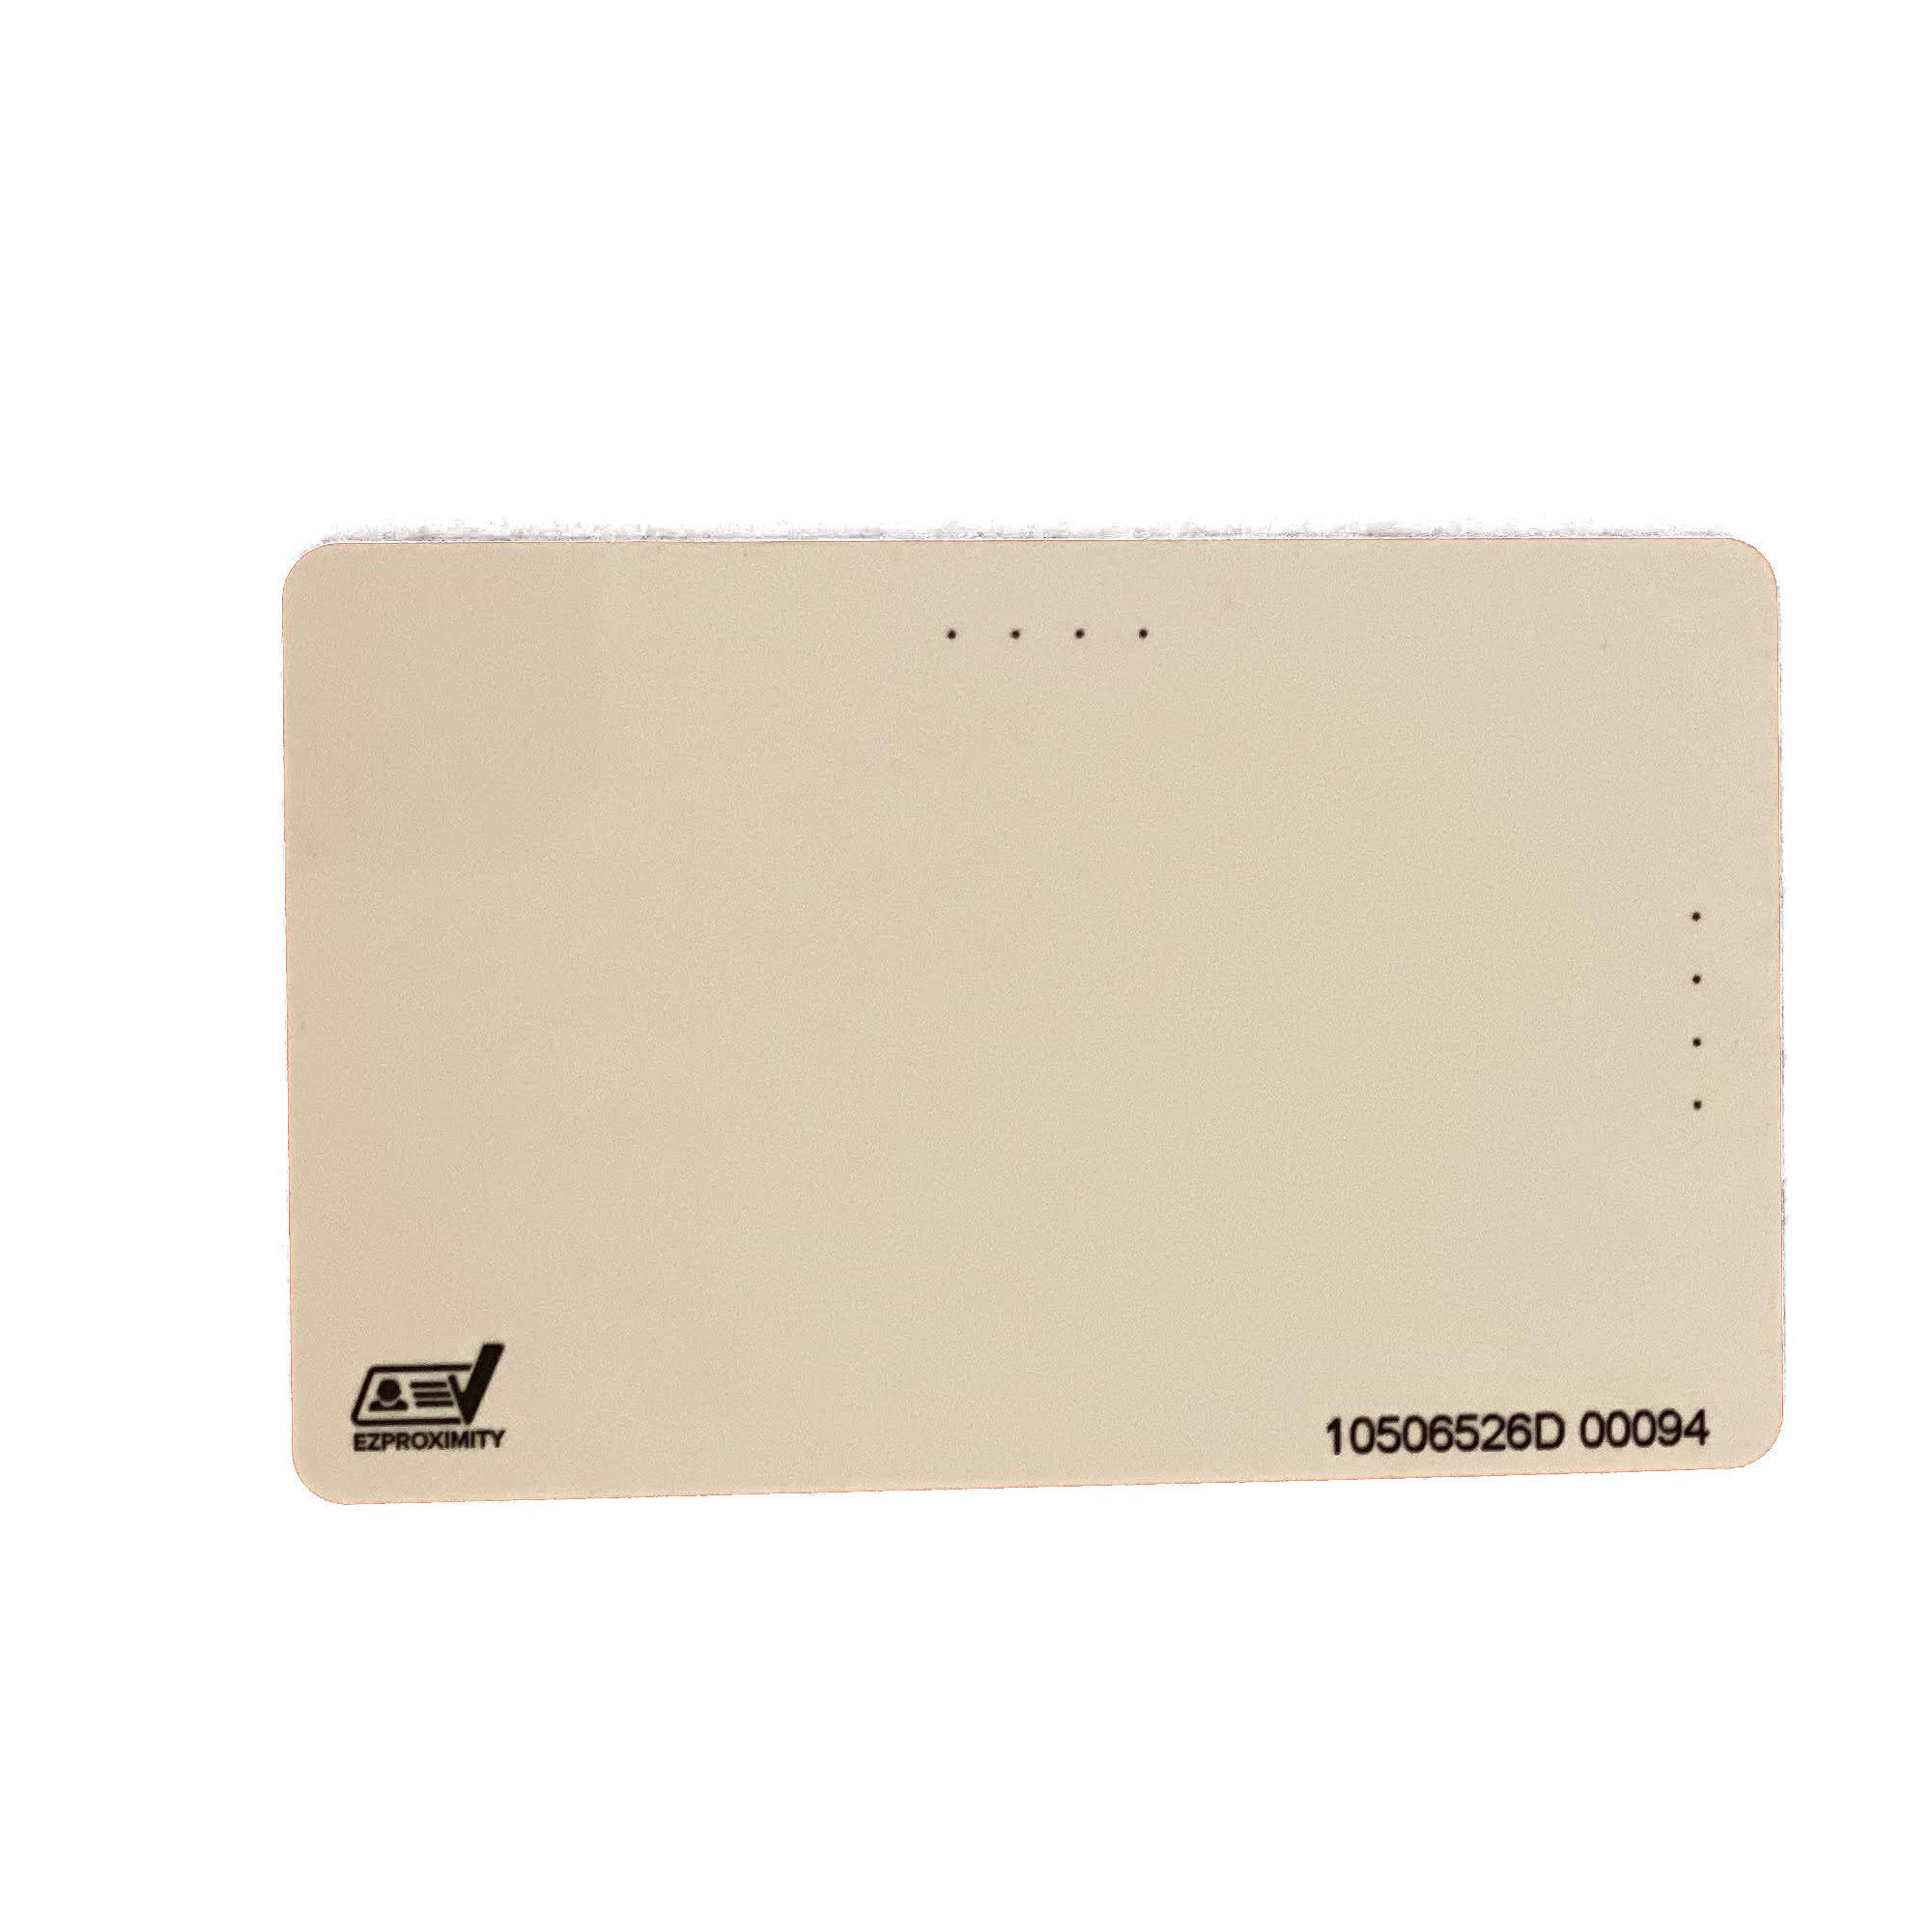 EZProximity ISOProx Cards – Pack of 100